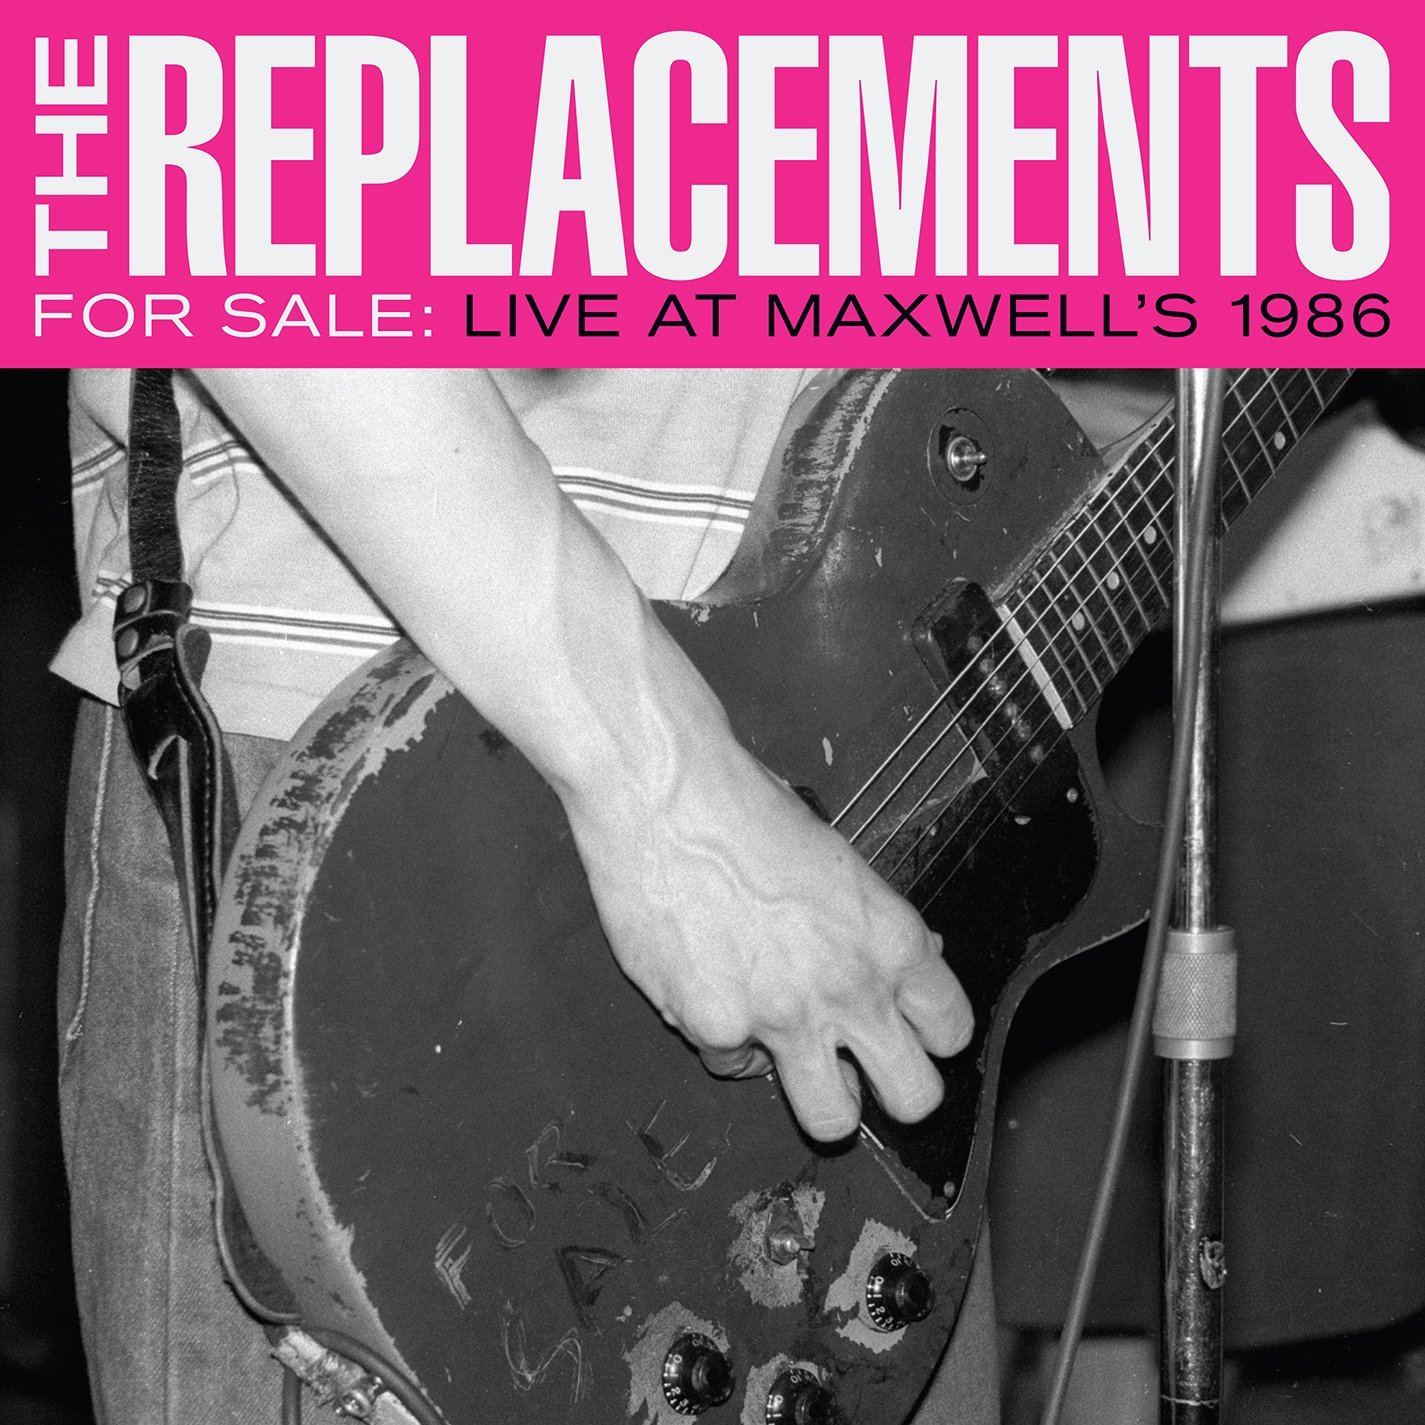 The Replacements For Sale: Live at Maxwell's 1986